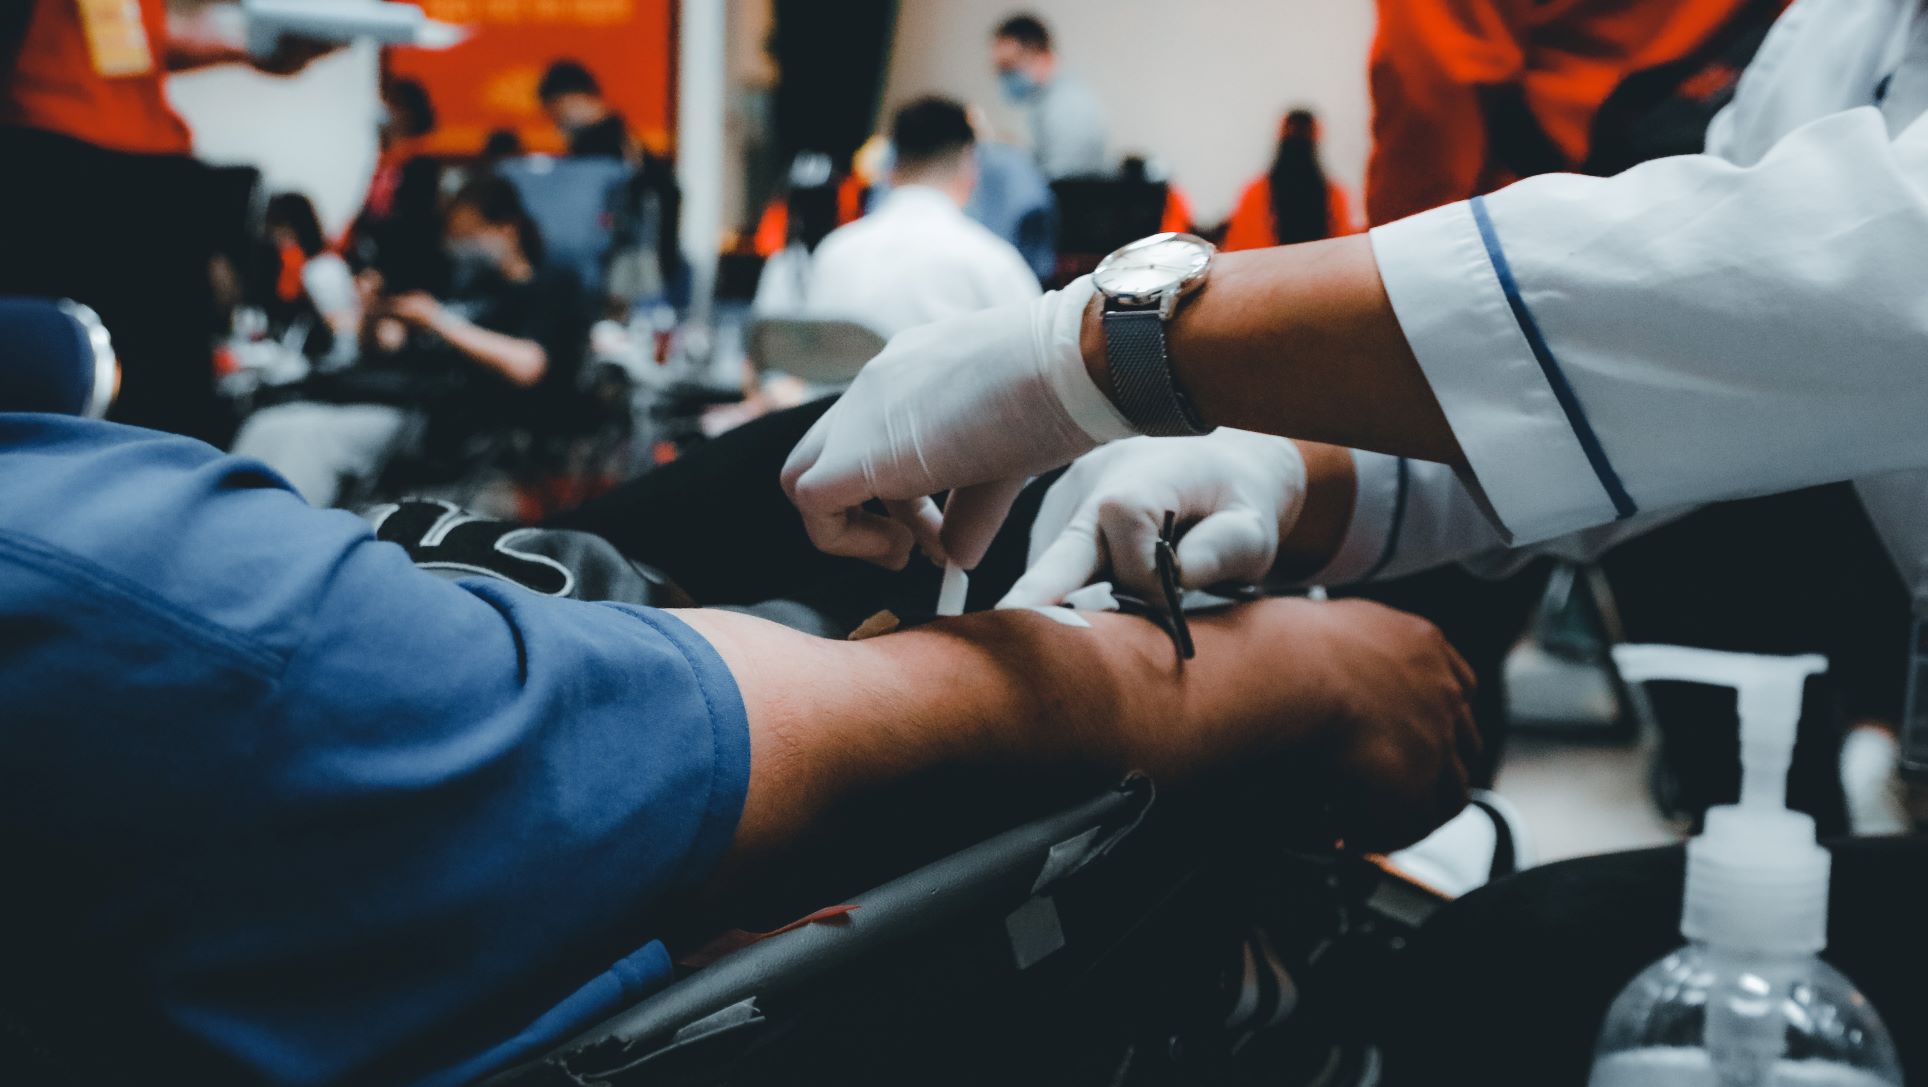 Person with gloves cleaning arm to draw blood at blood drive